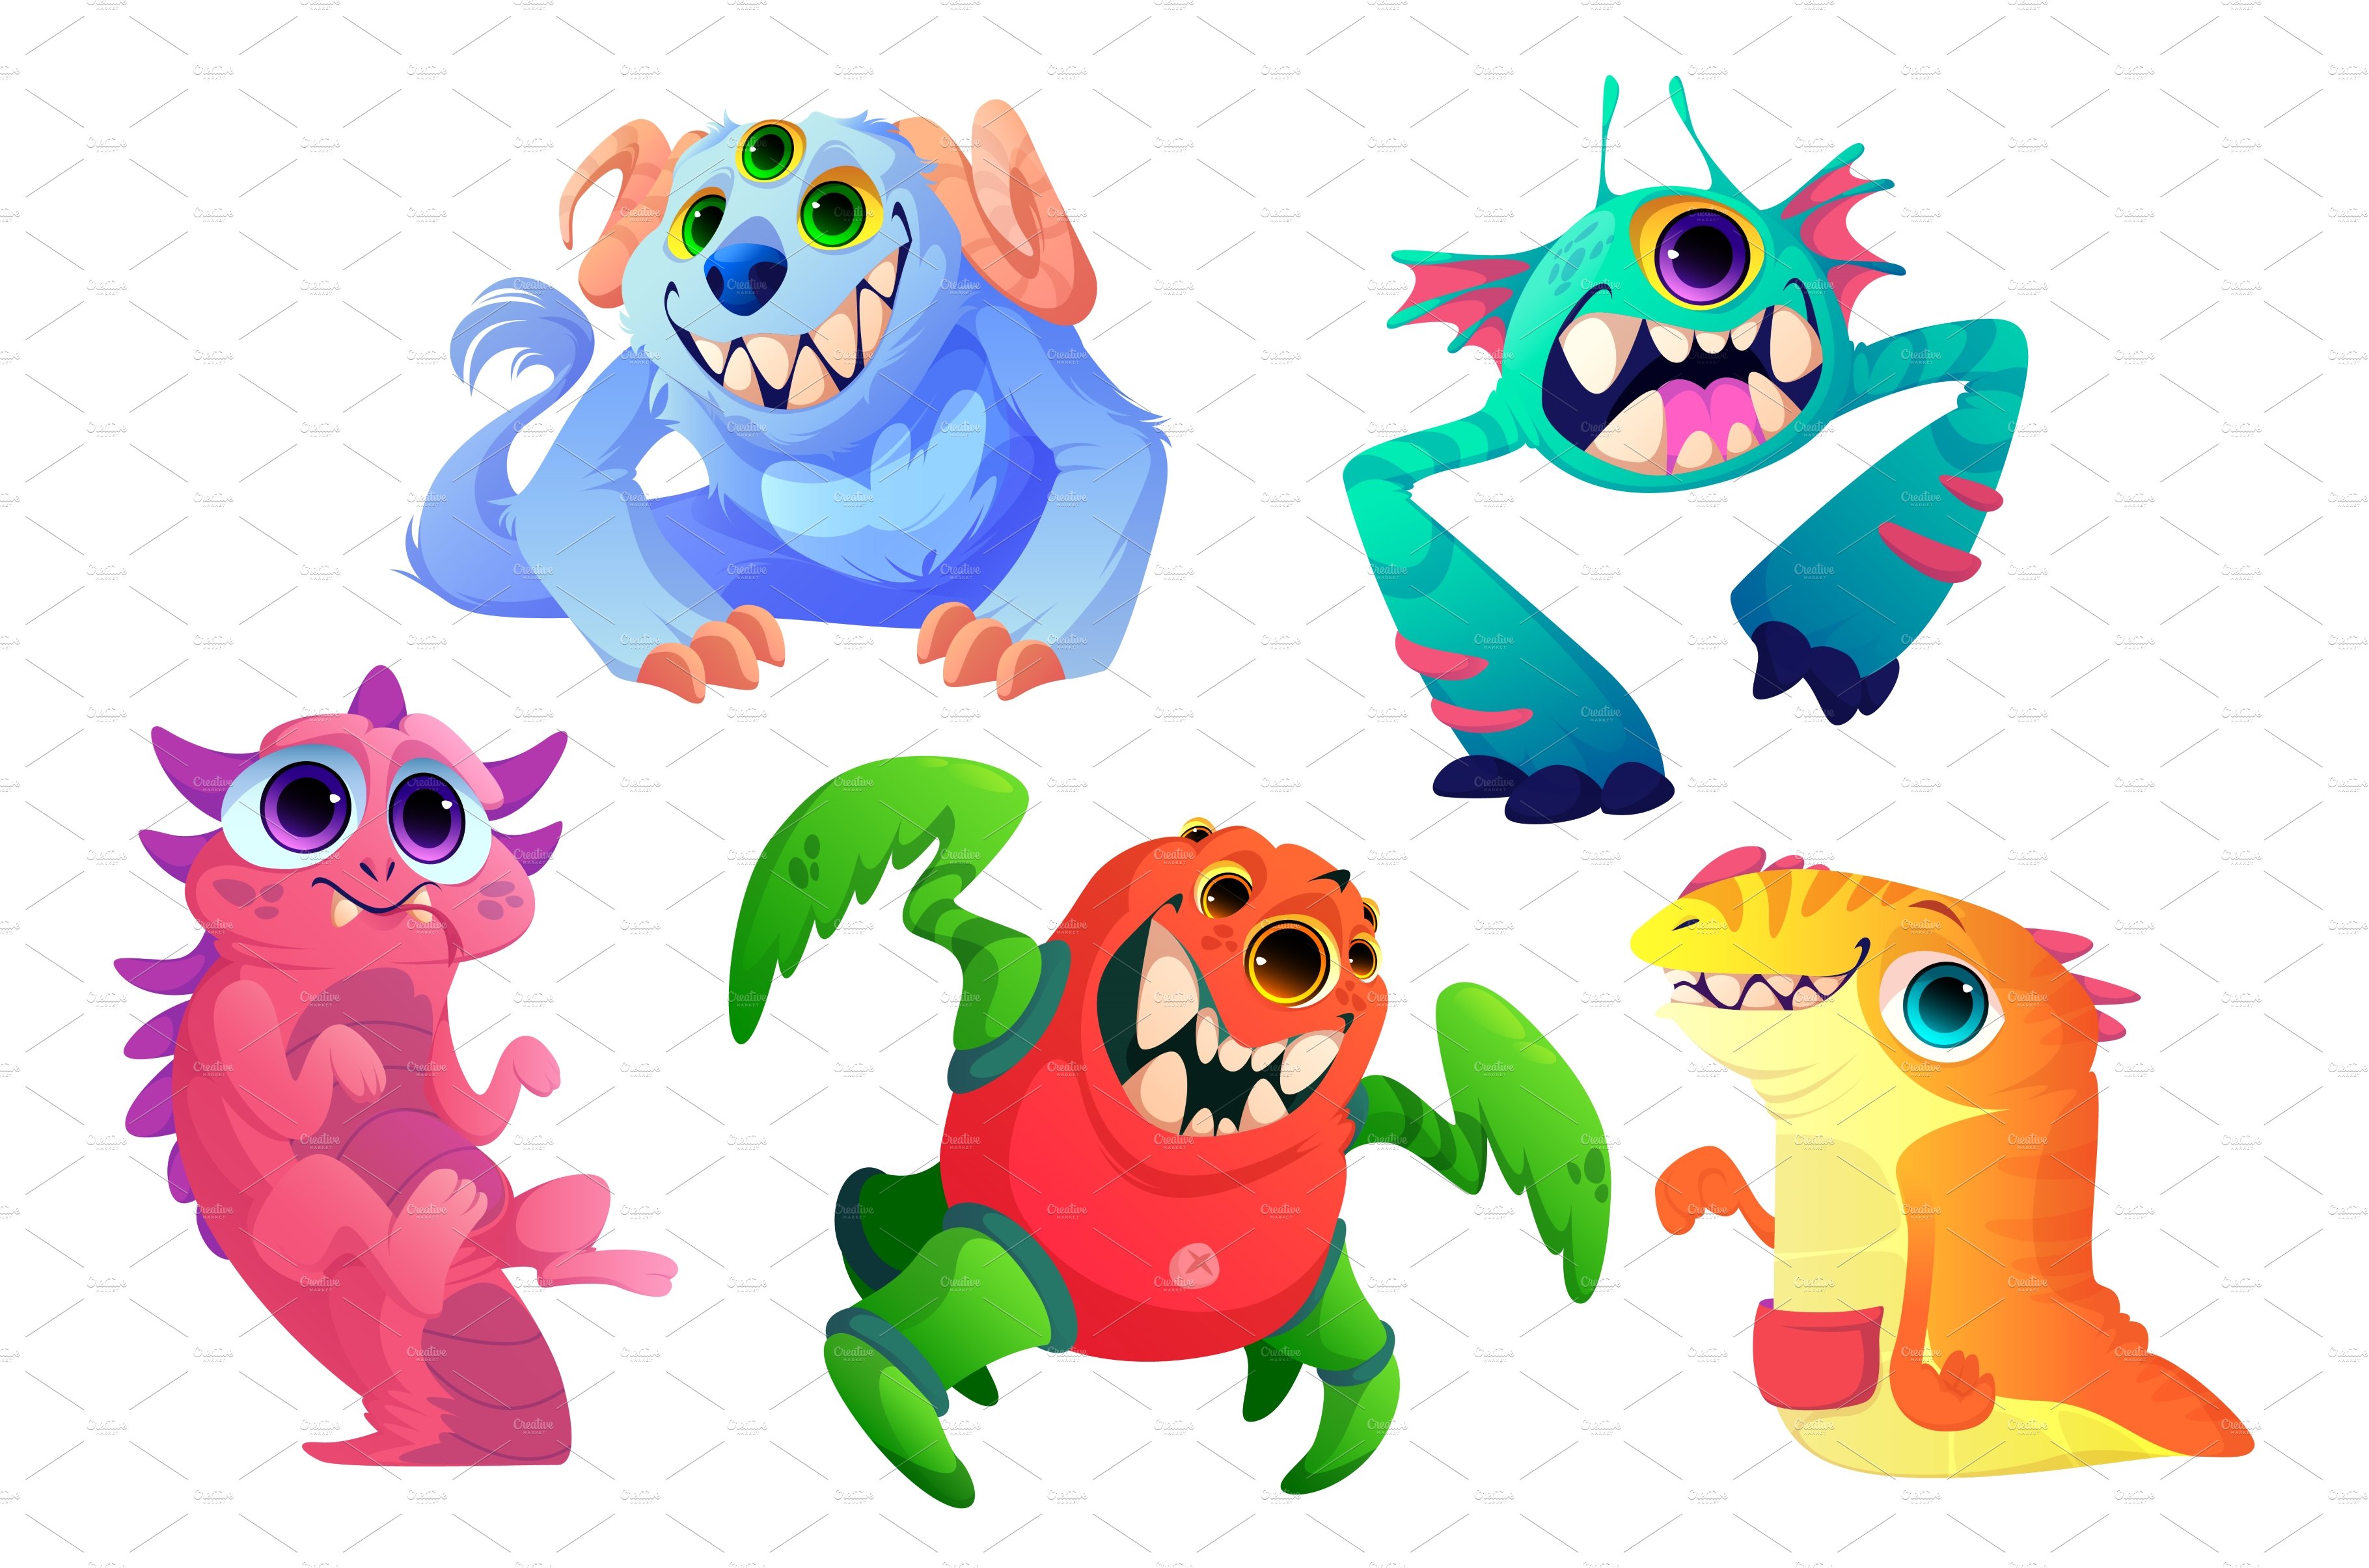 Cute monsters set, cartoon funny cover image.